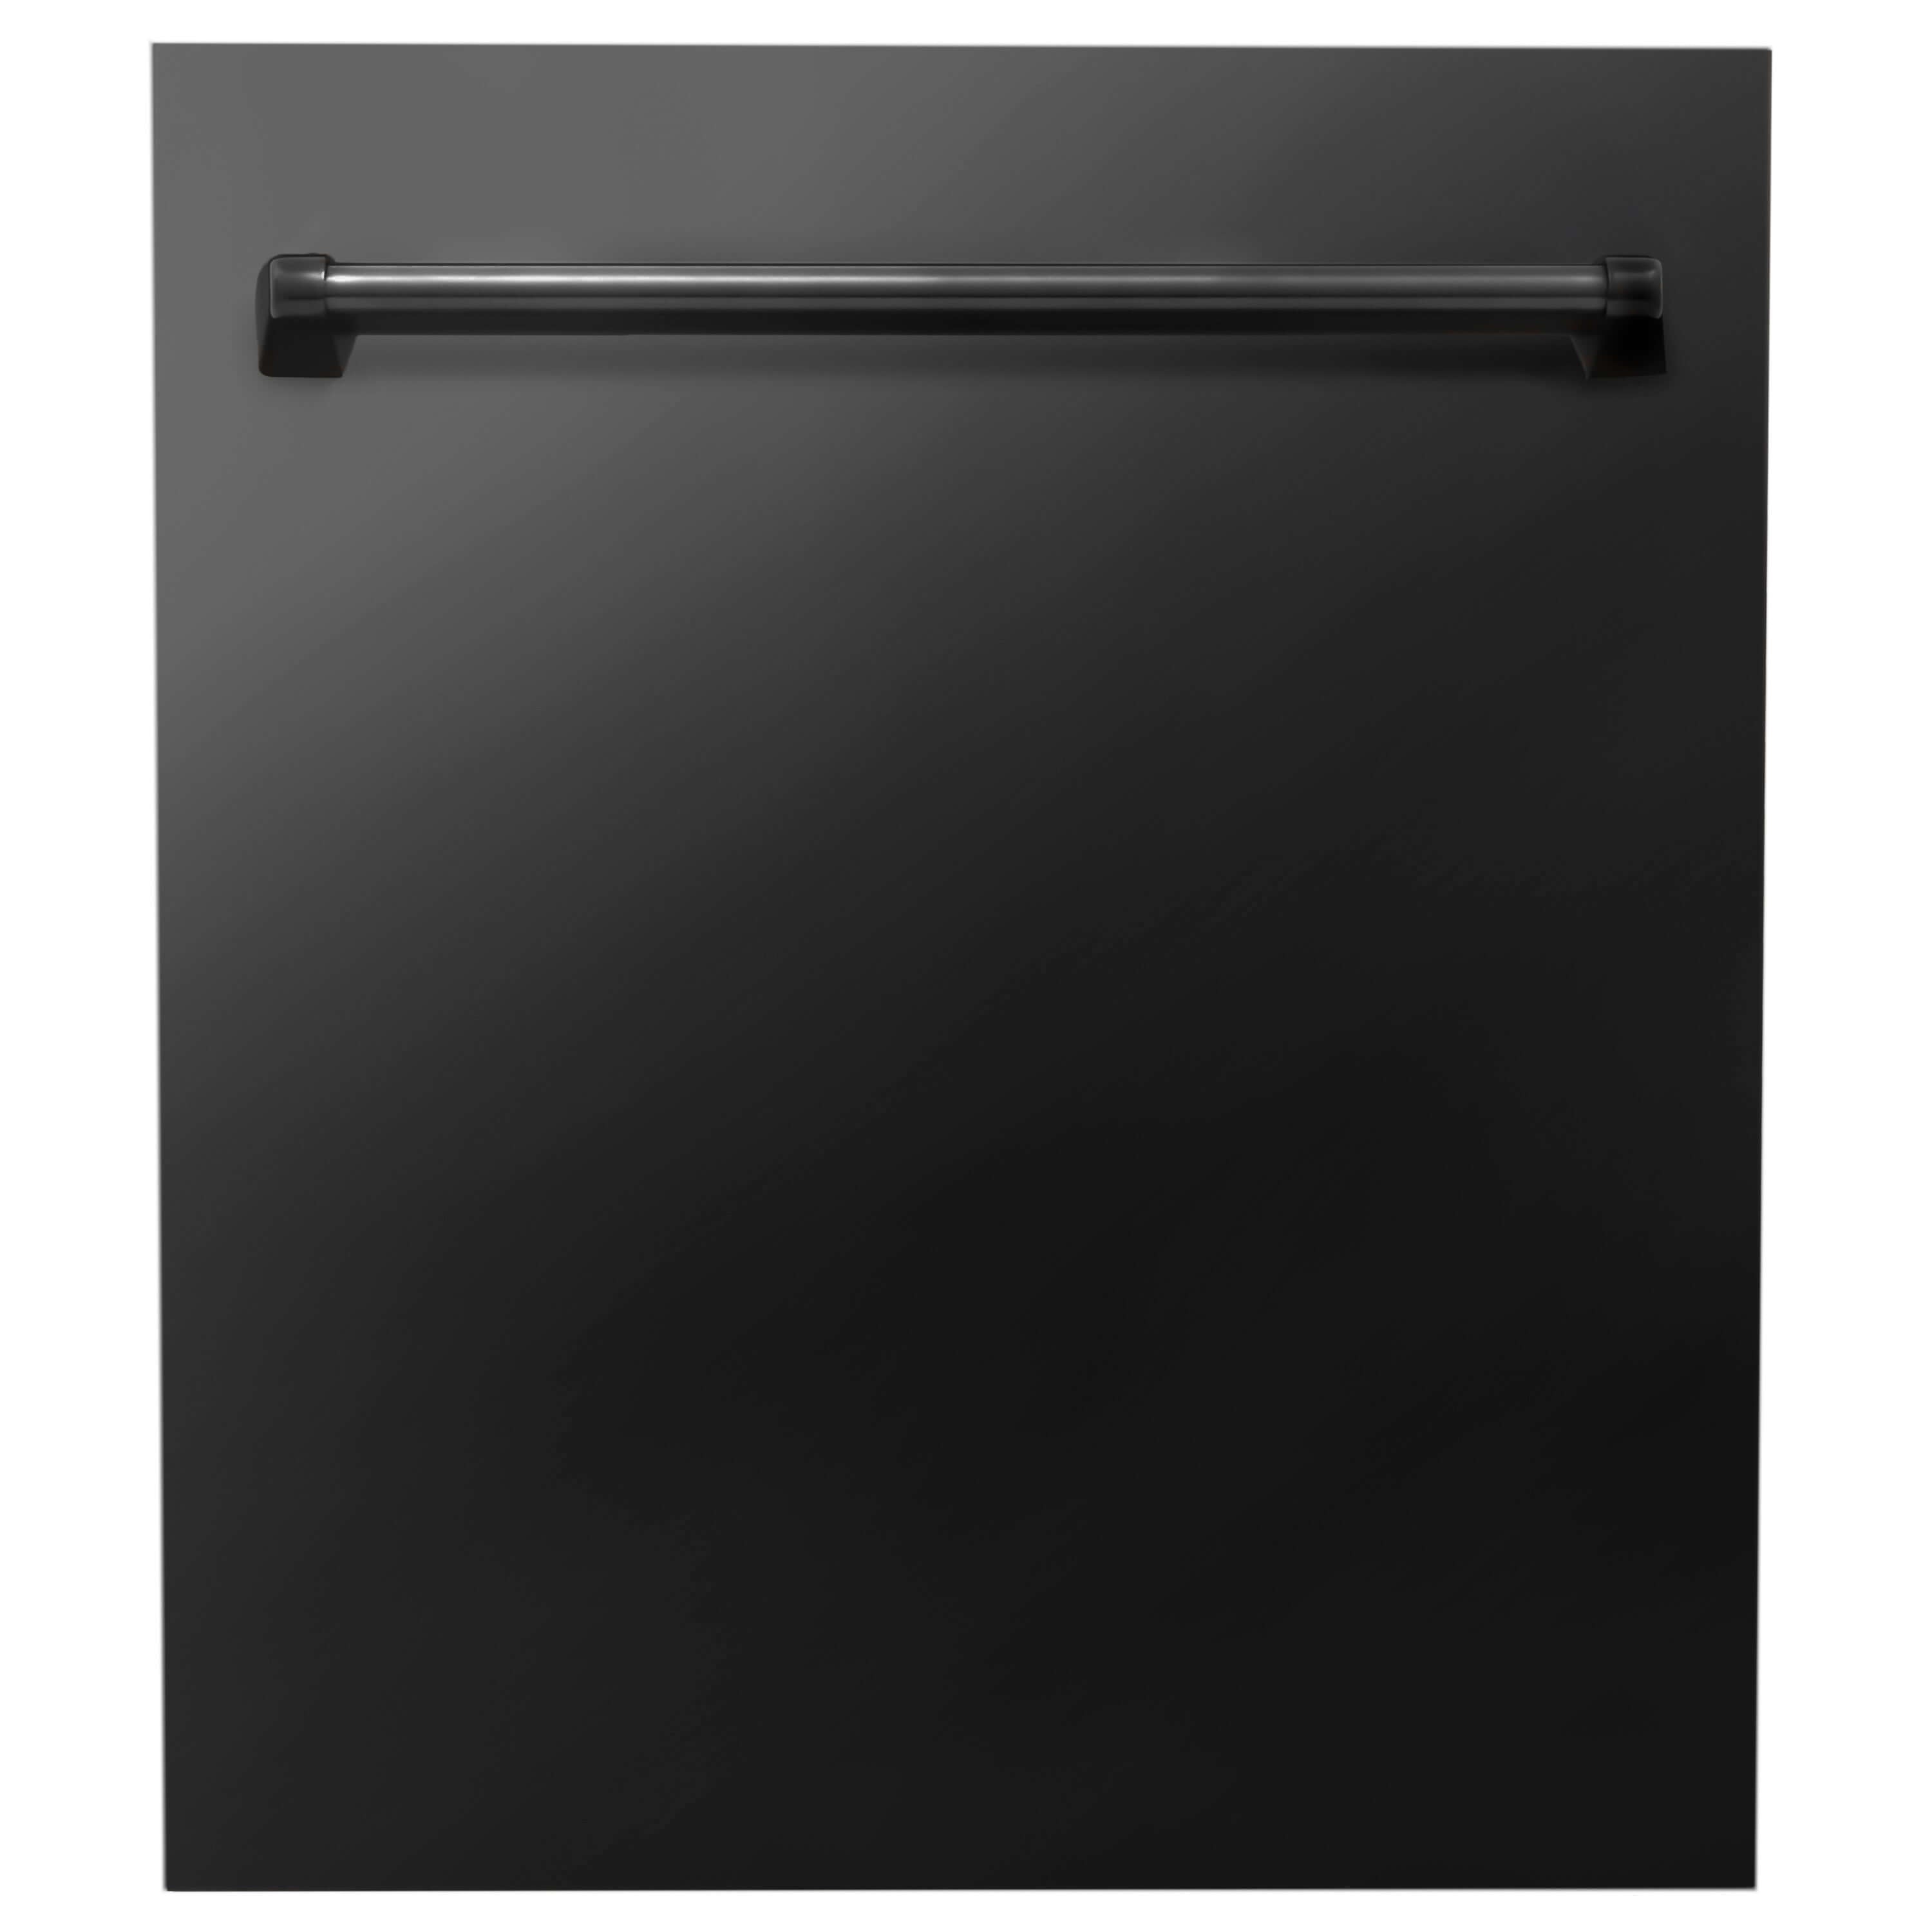 ZLINE 24 in. Black Stainless Top Control Built-In Dishwasher with Stainless Steel Tub and Traditional Style Handle, 52dBa (DW-BS-24)